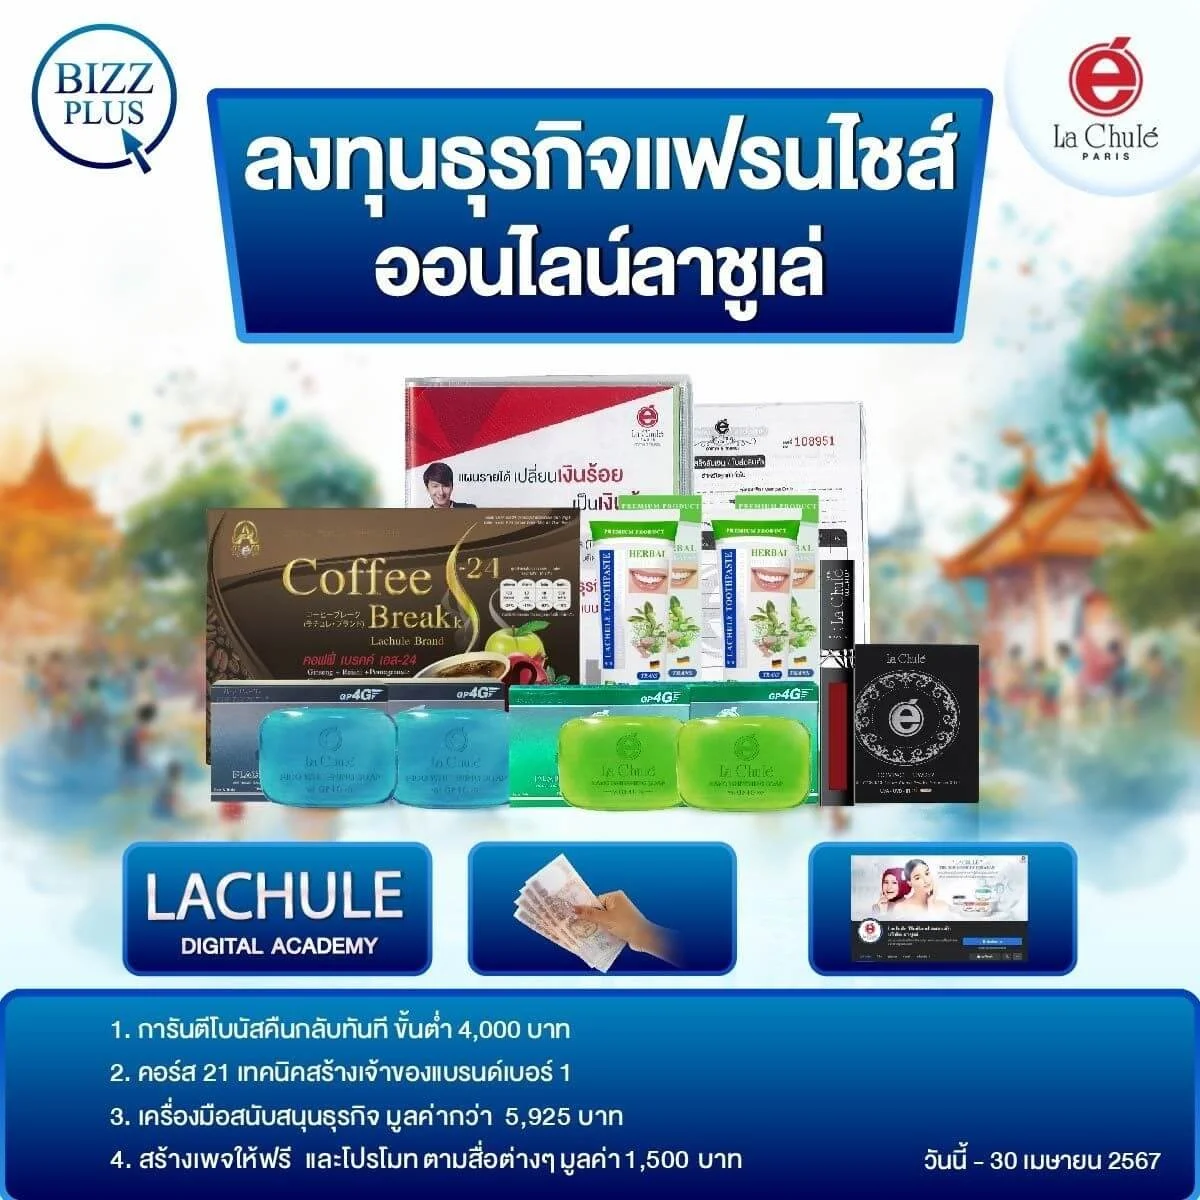 Join the online LACHULE franchise business